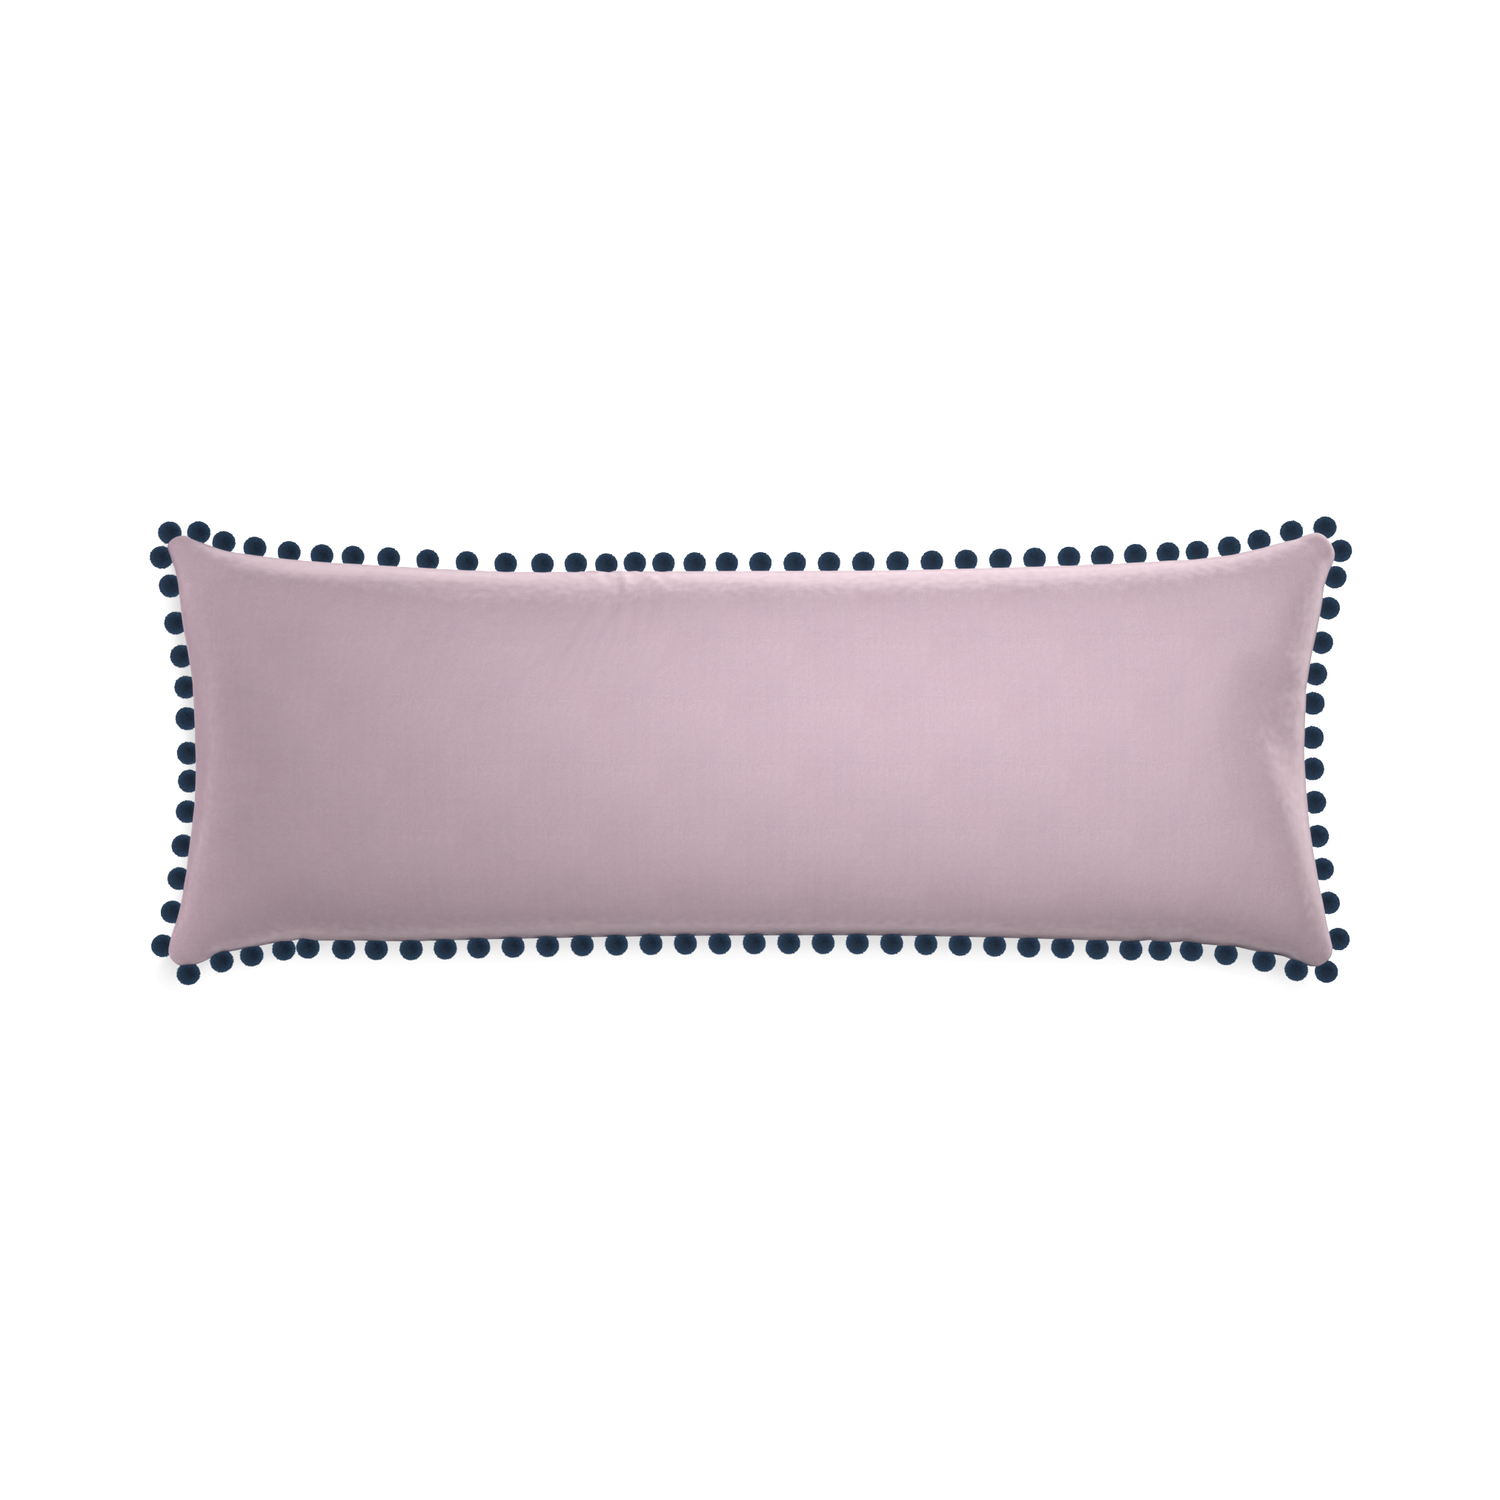 Xl-lumbar lilac velvet custom lilacpillow with c on white background